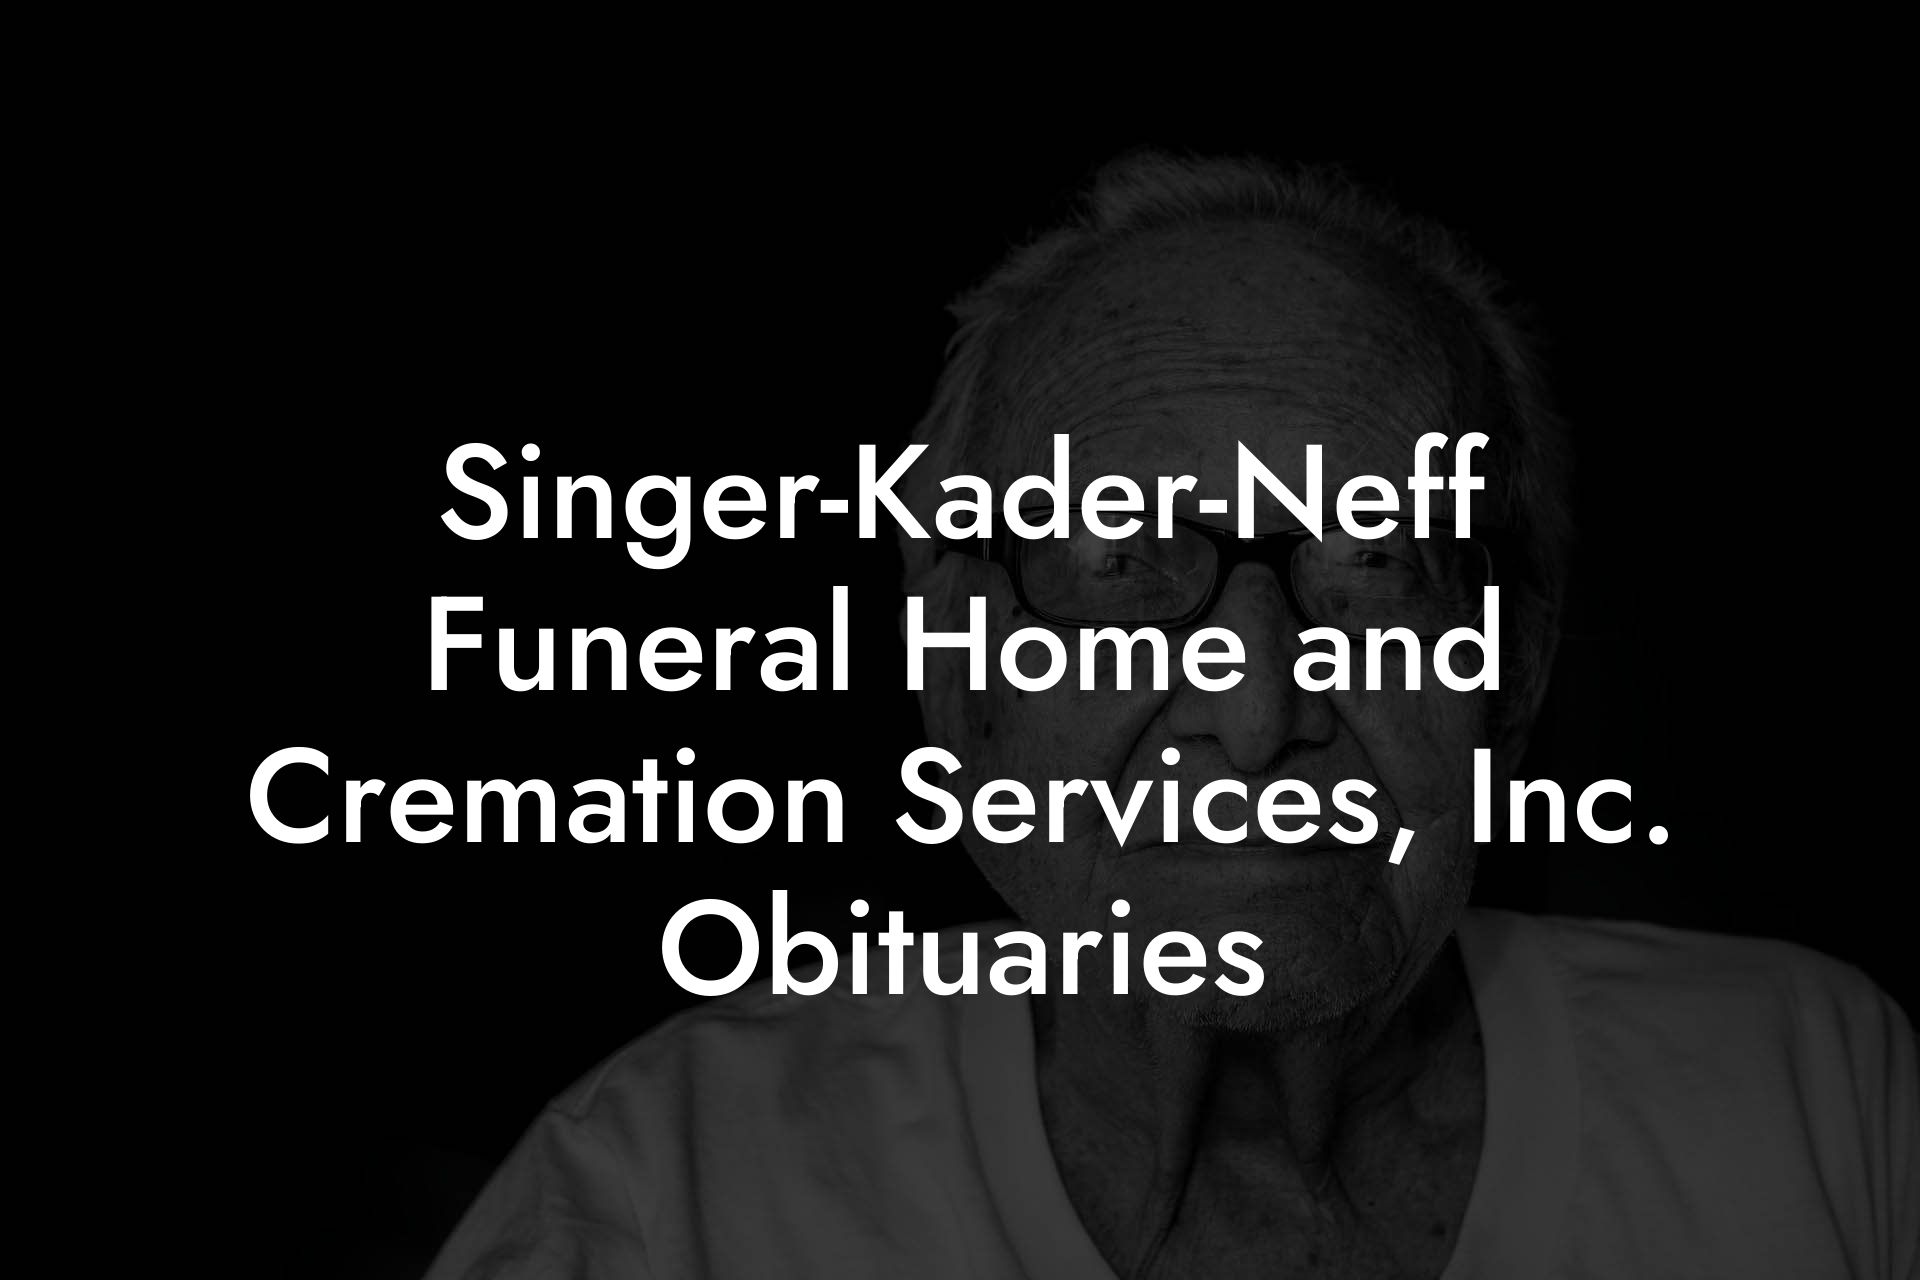 Singer-Kader-Neff Funeral Home and Cremation Services, Inc. Obituaries